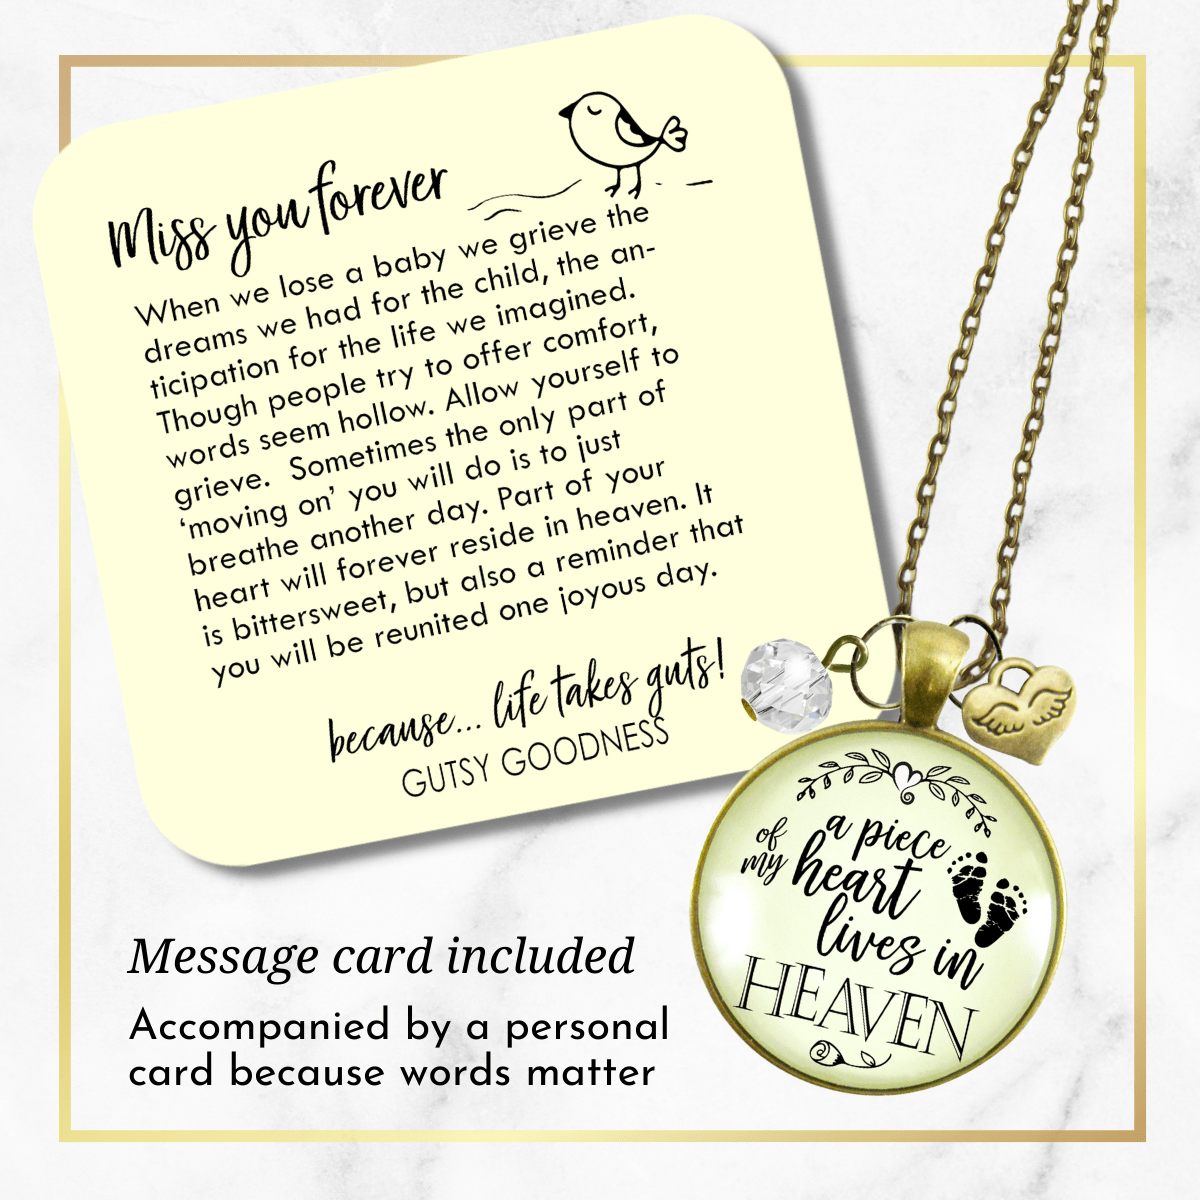 Gutsy Goodness Miscarriage Baby Loss Necklace Piece of Heart Heaven Memory Angel Wing Jewelry - Gutsy Goodness Handmade Jewelry;Miscarriage Baby Loss Necklace Piece Of Heart Heaven Memory Angel Wing Jewelry - Gutsy Goodness Handmade Jewelry Gifts